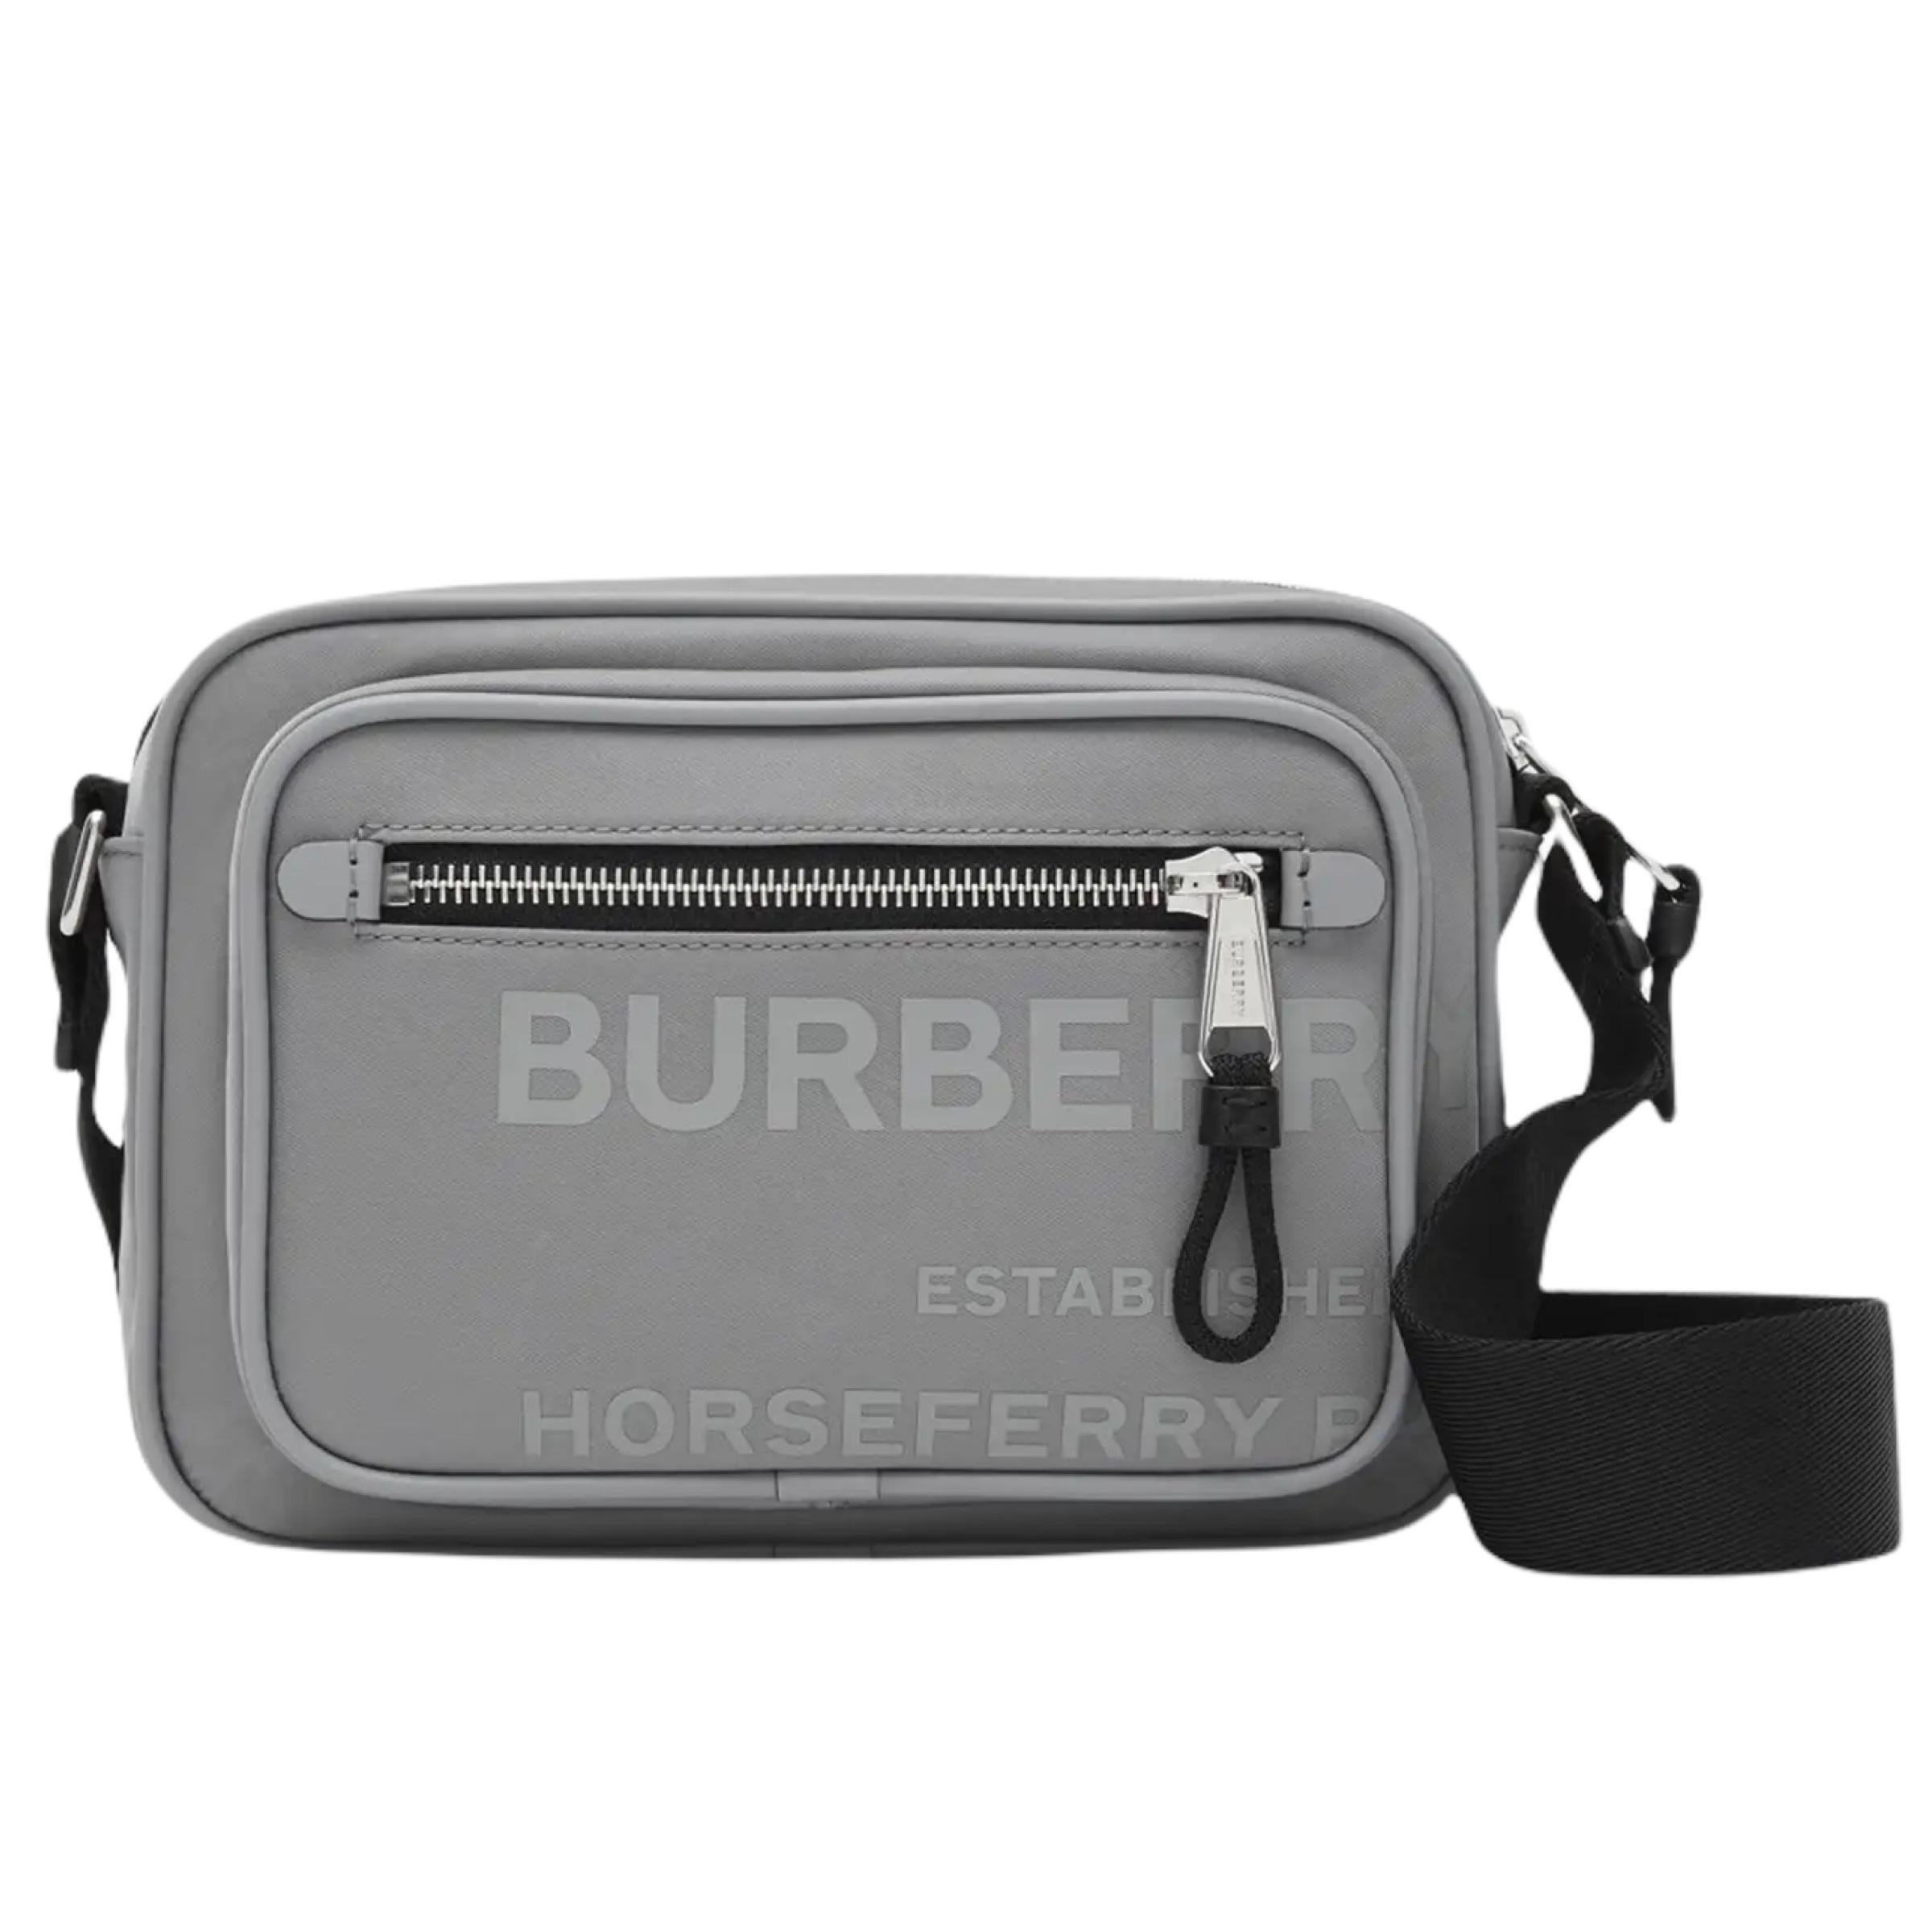 New Burberry Gray Horseferry Print Econyl Crossbody Bag

Authenticity Guaranteed

DETAILS
Brand: Burberry
Condition: Brand new
Gender: Unisex
Category: Crossbody bag
Color: Gray
Material: Econyl
Printed logo
Adjustable shoulder strap
Silver-tone